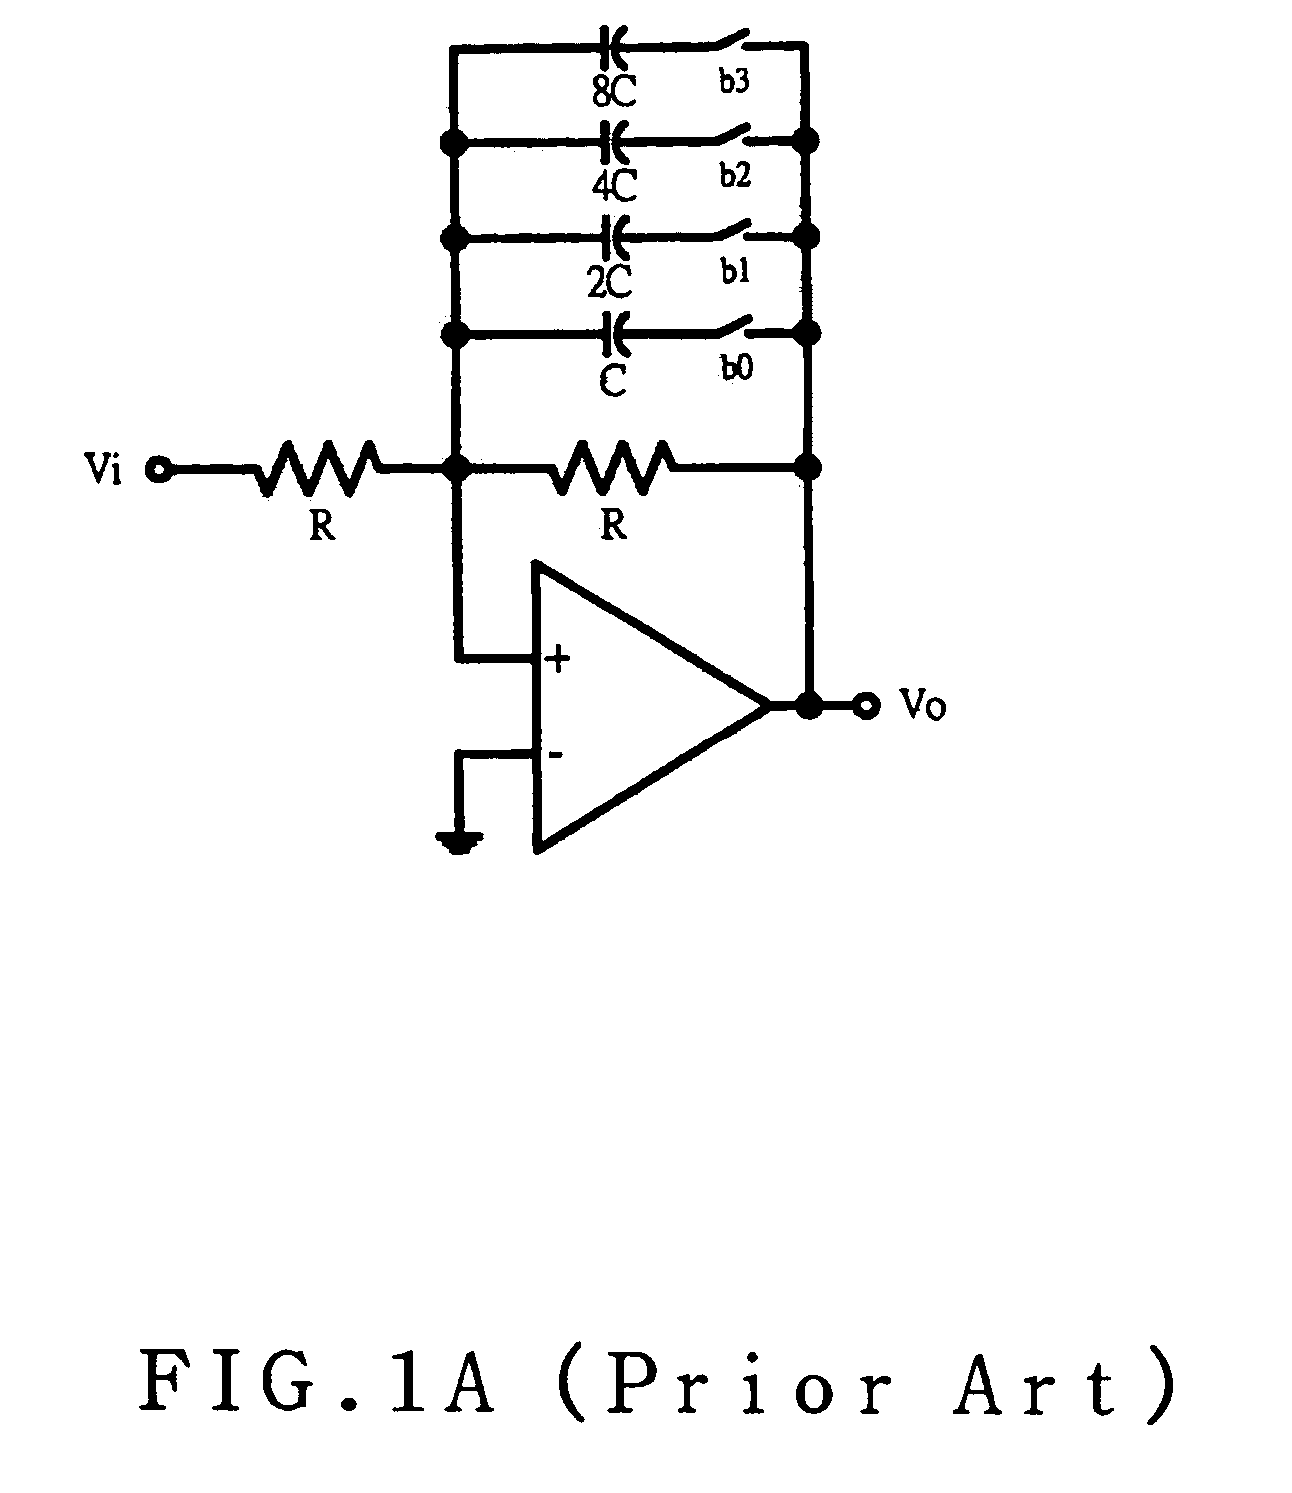 Programmable/tunable active RC filter